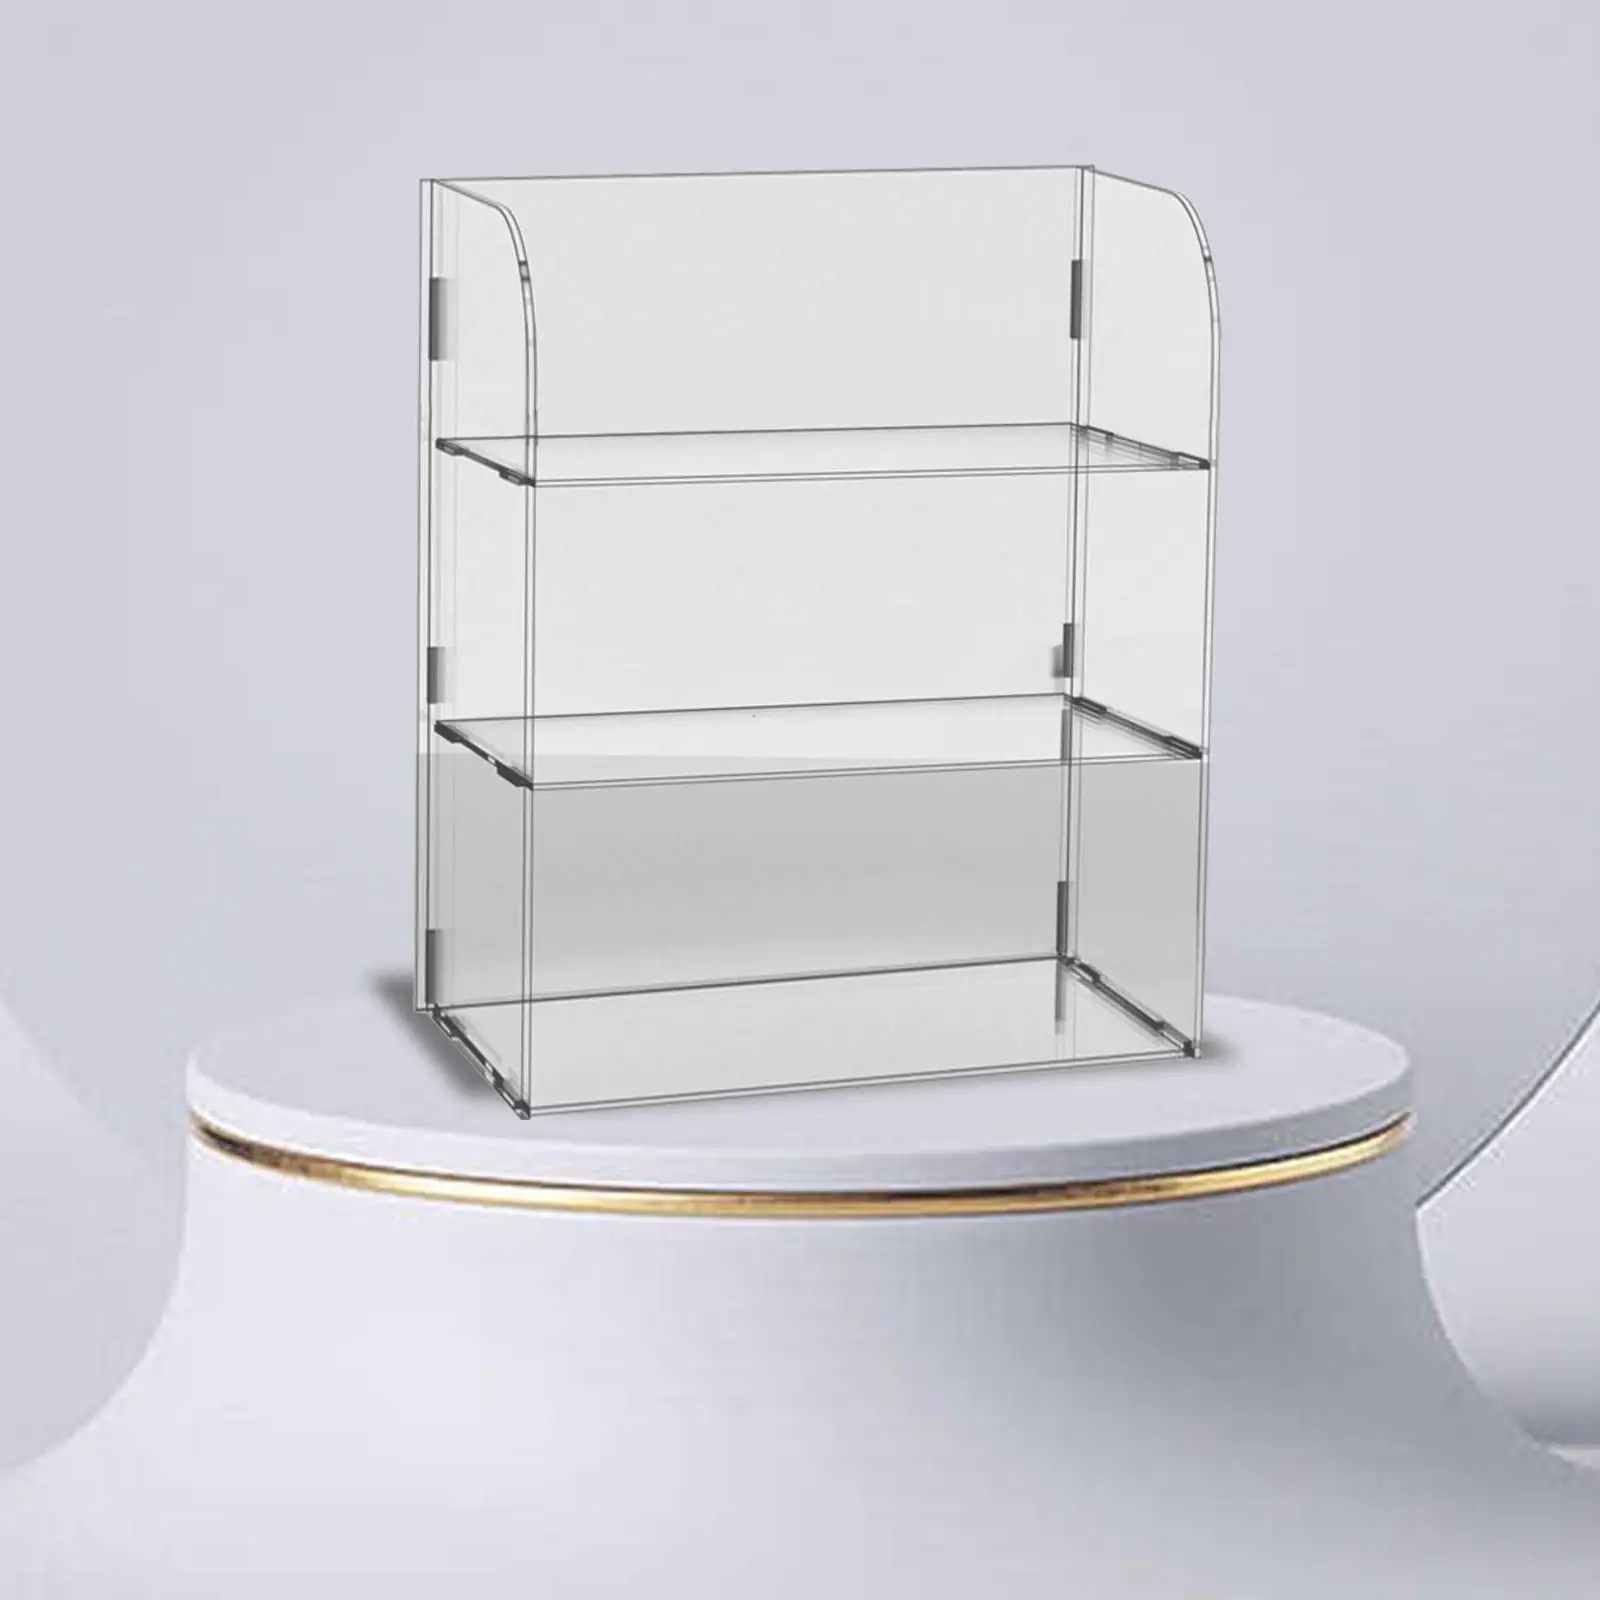 Multi Purpose Acrylic Display Rack Risers Showcase Stand Shelves Transparent Countertop Toy Dolls Figure for Jewelry Cosmetics